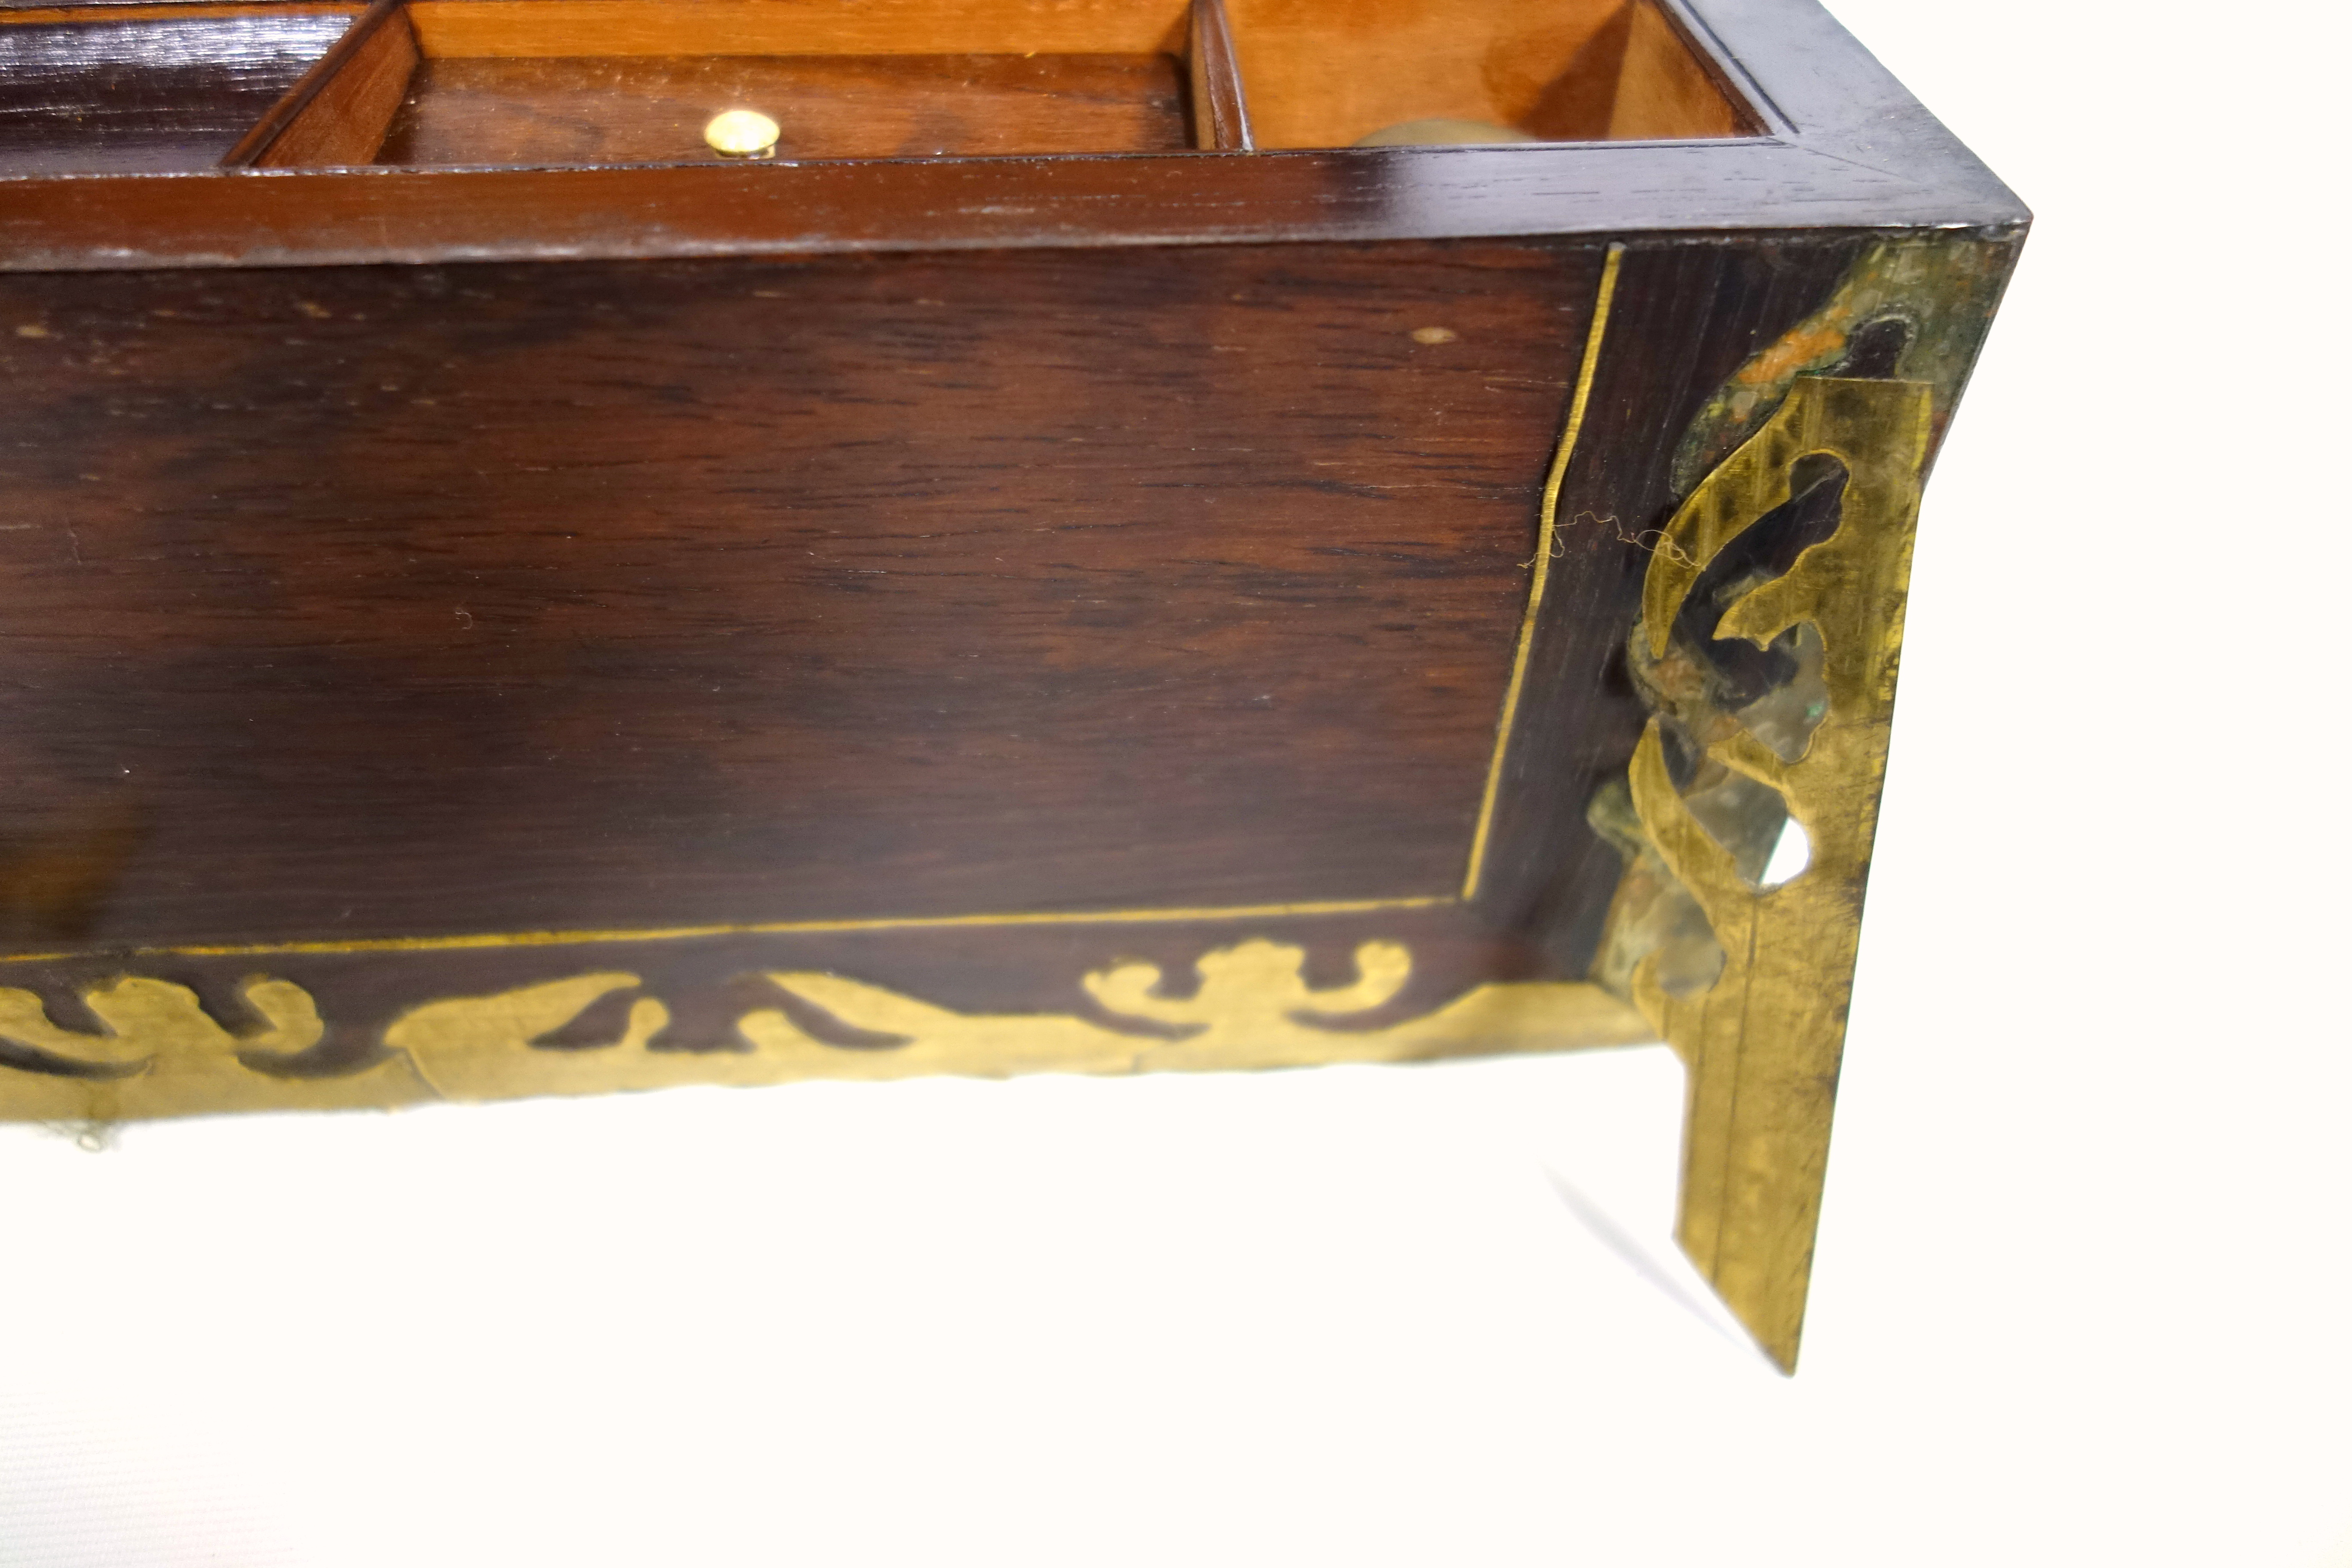 Victorian brass inlaid rosewood portable writing desk with 2 brass covered wells and secret panel - Image 8 of 14